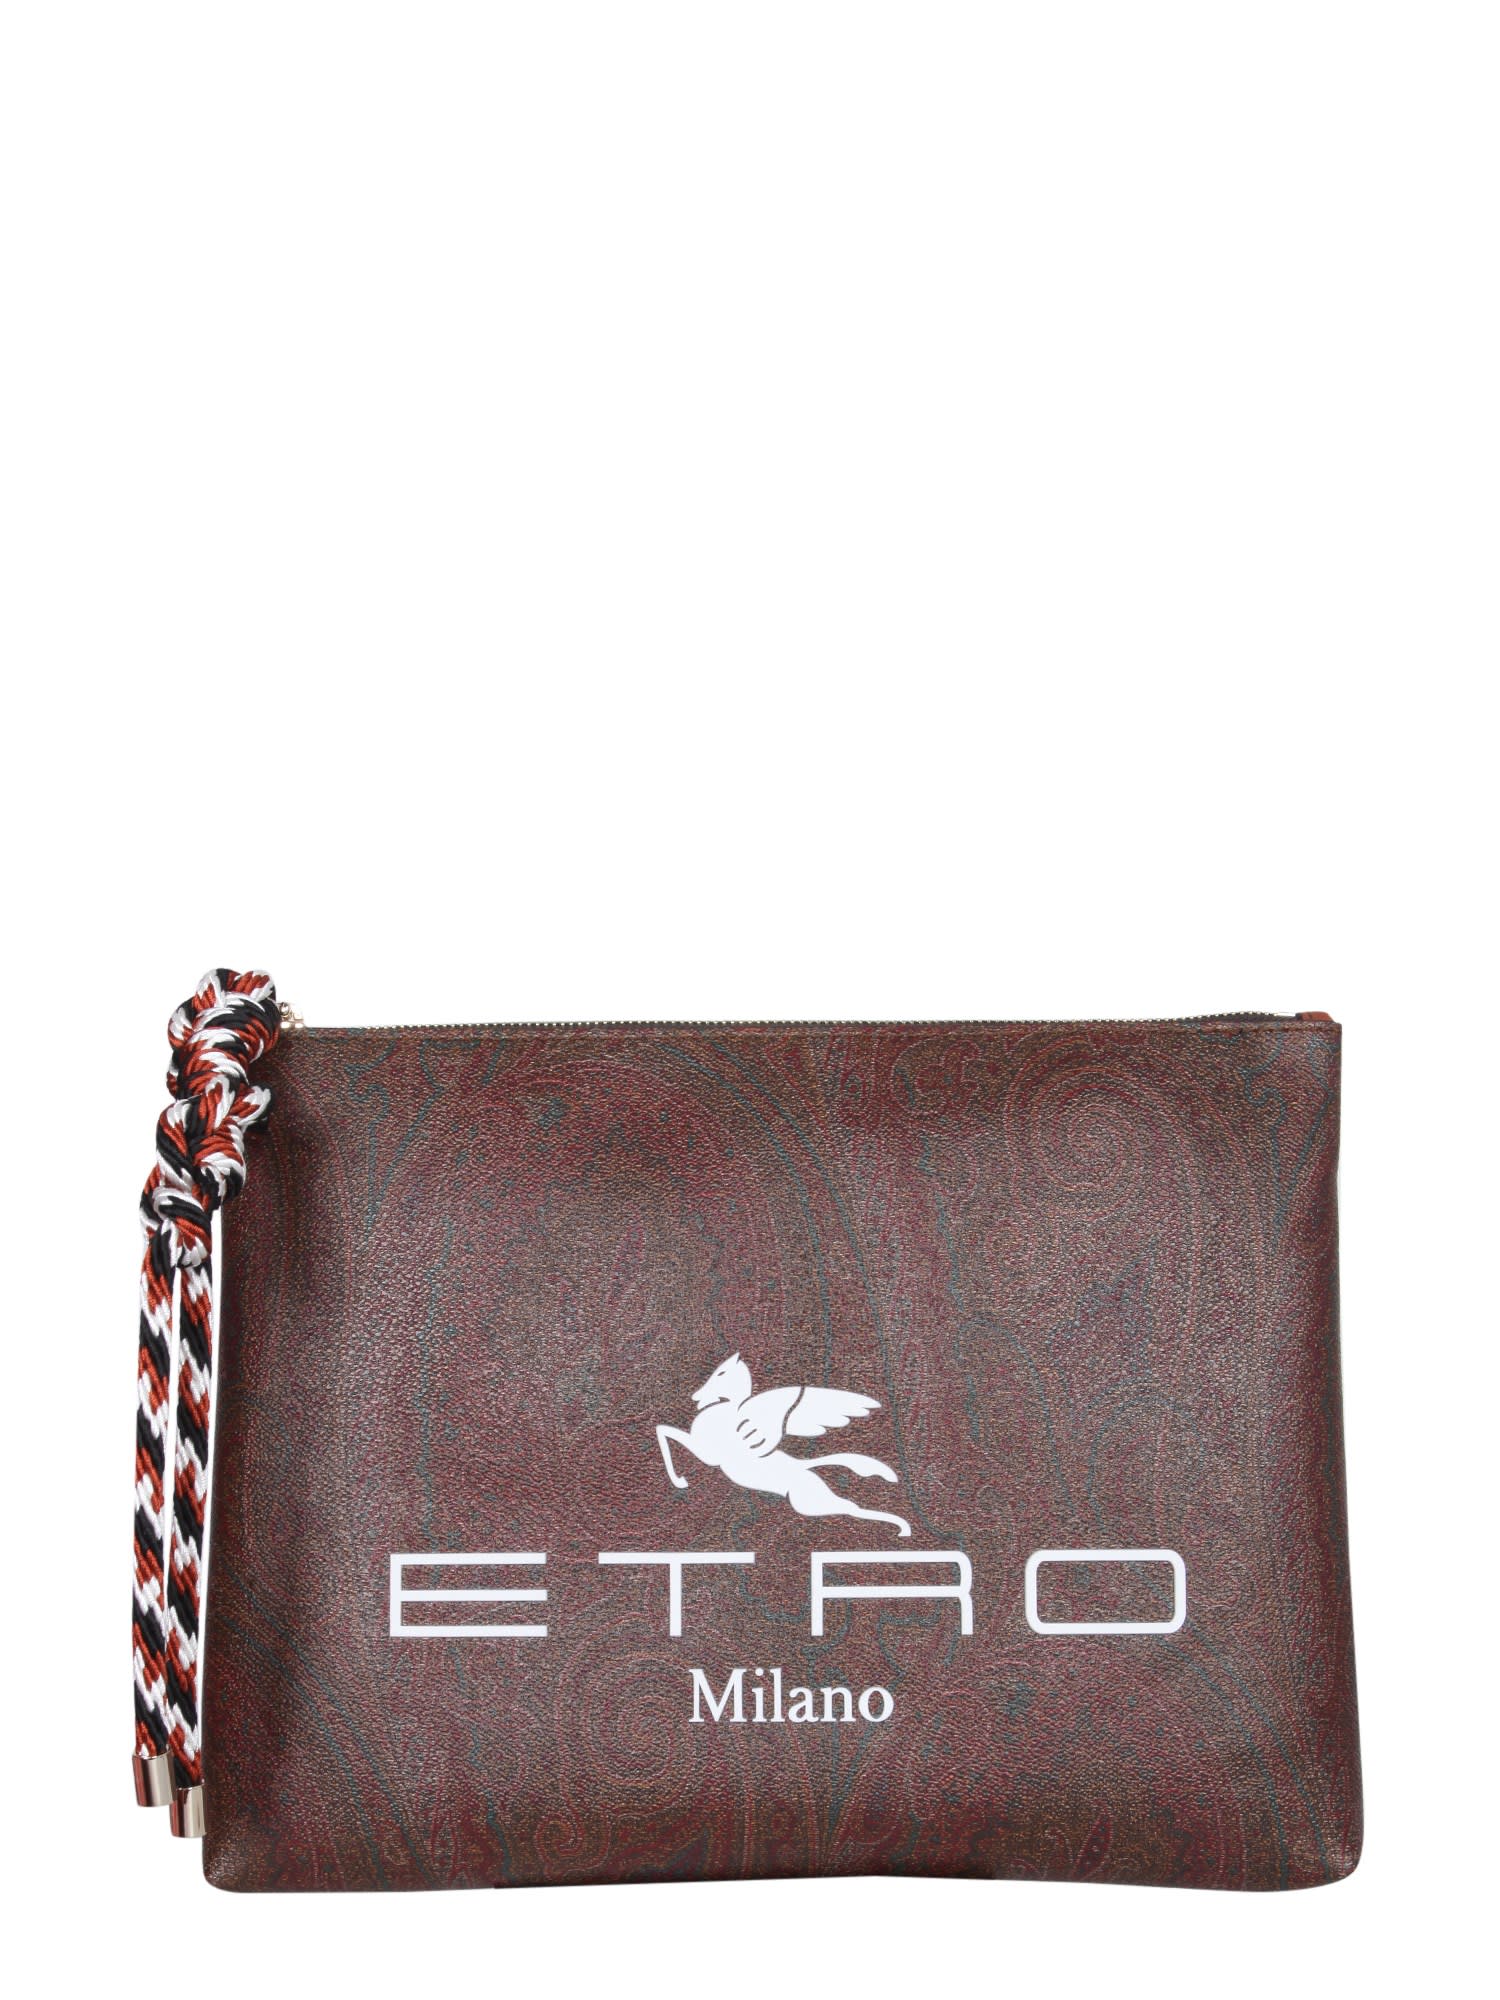 Etro Coated Canvas Clutch